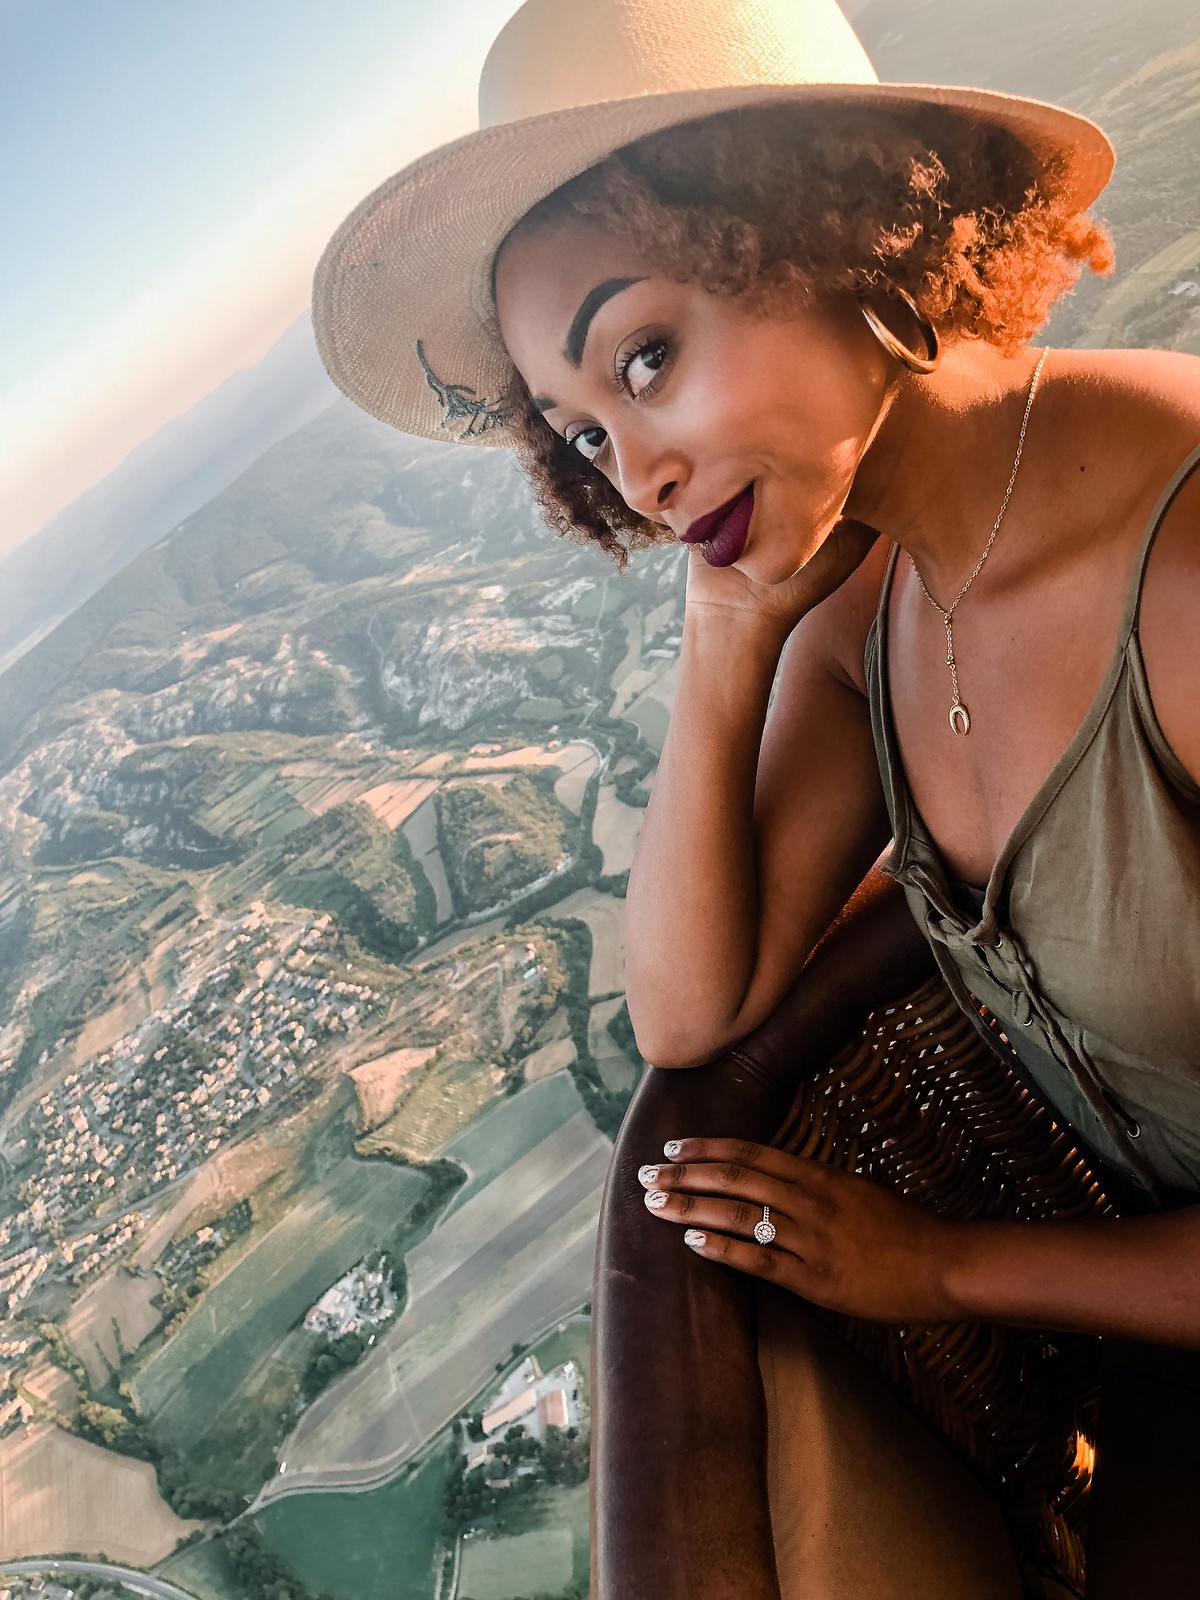 hot air balloon ride over Provence, France